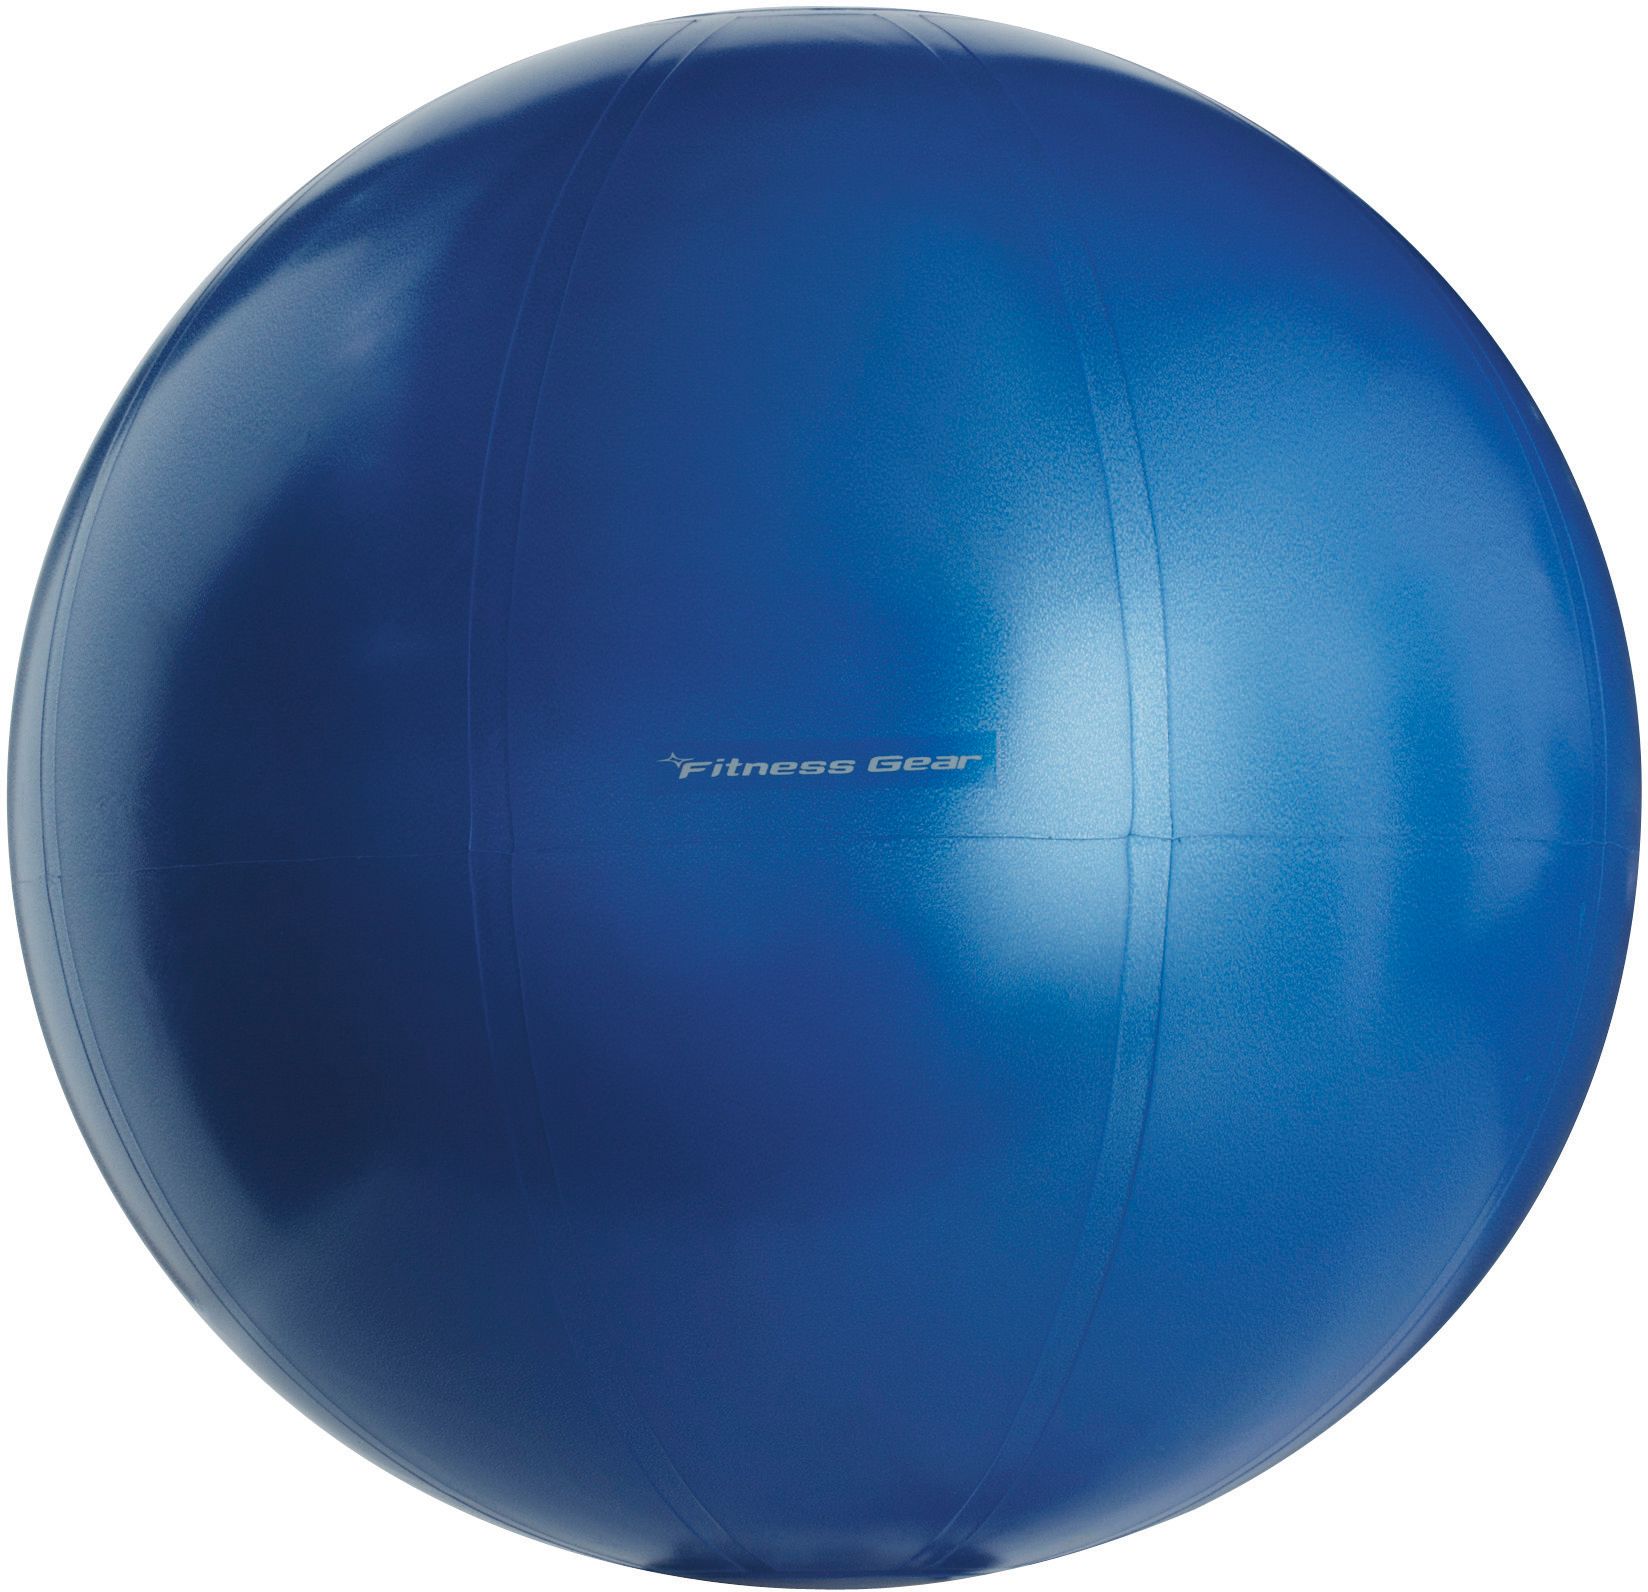 fitness gear exercise ball